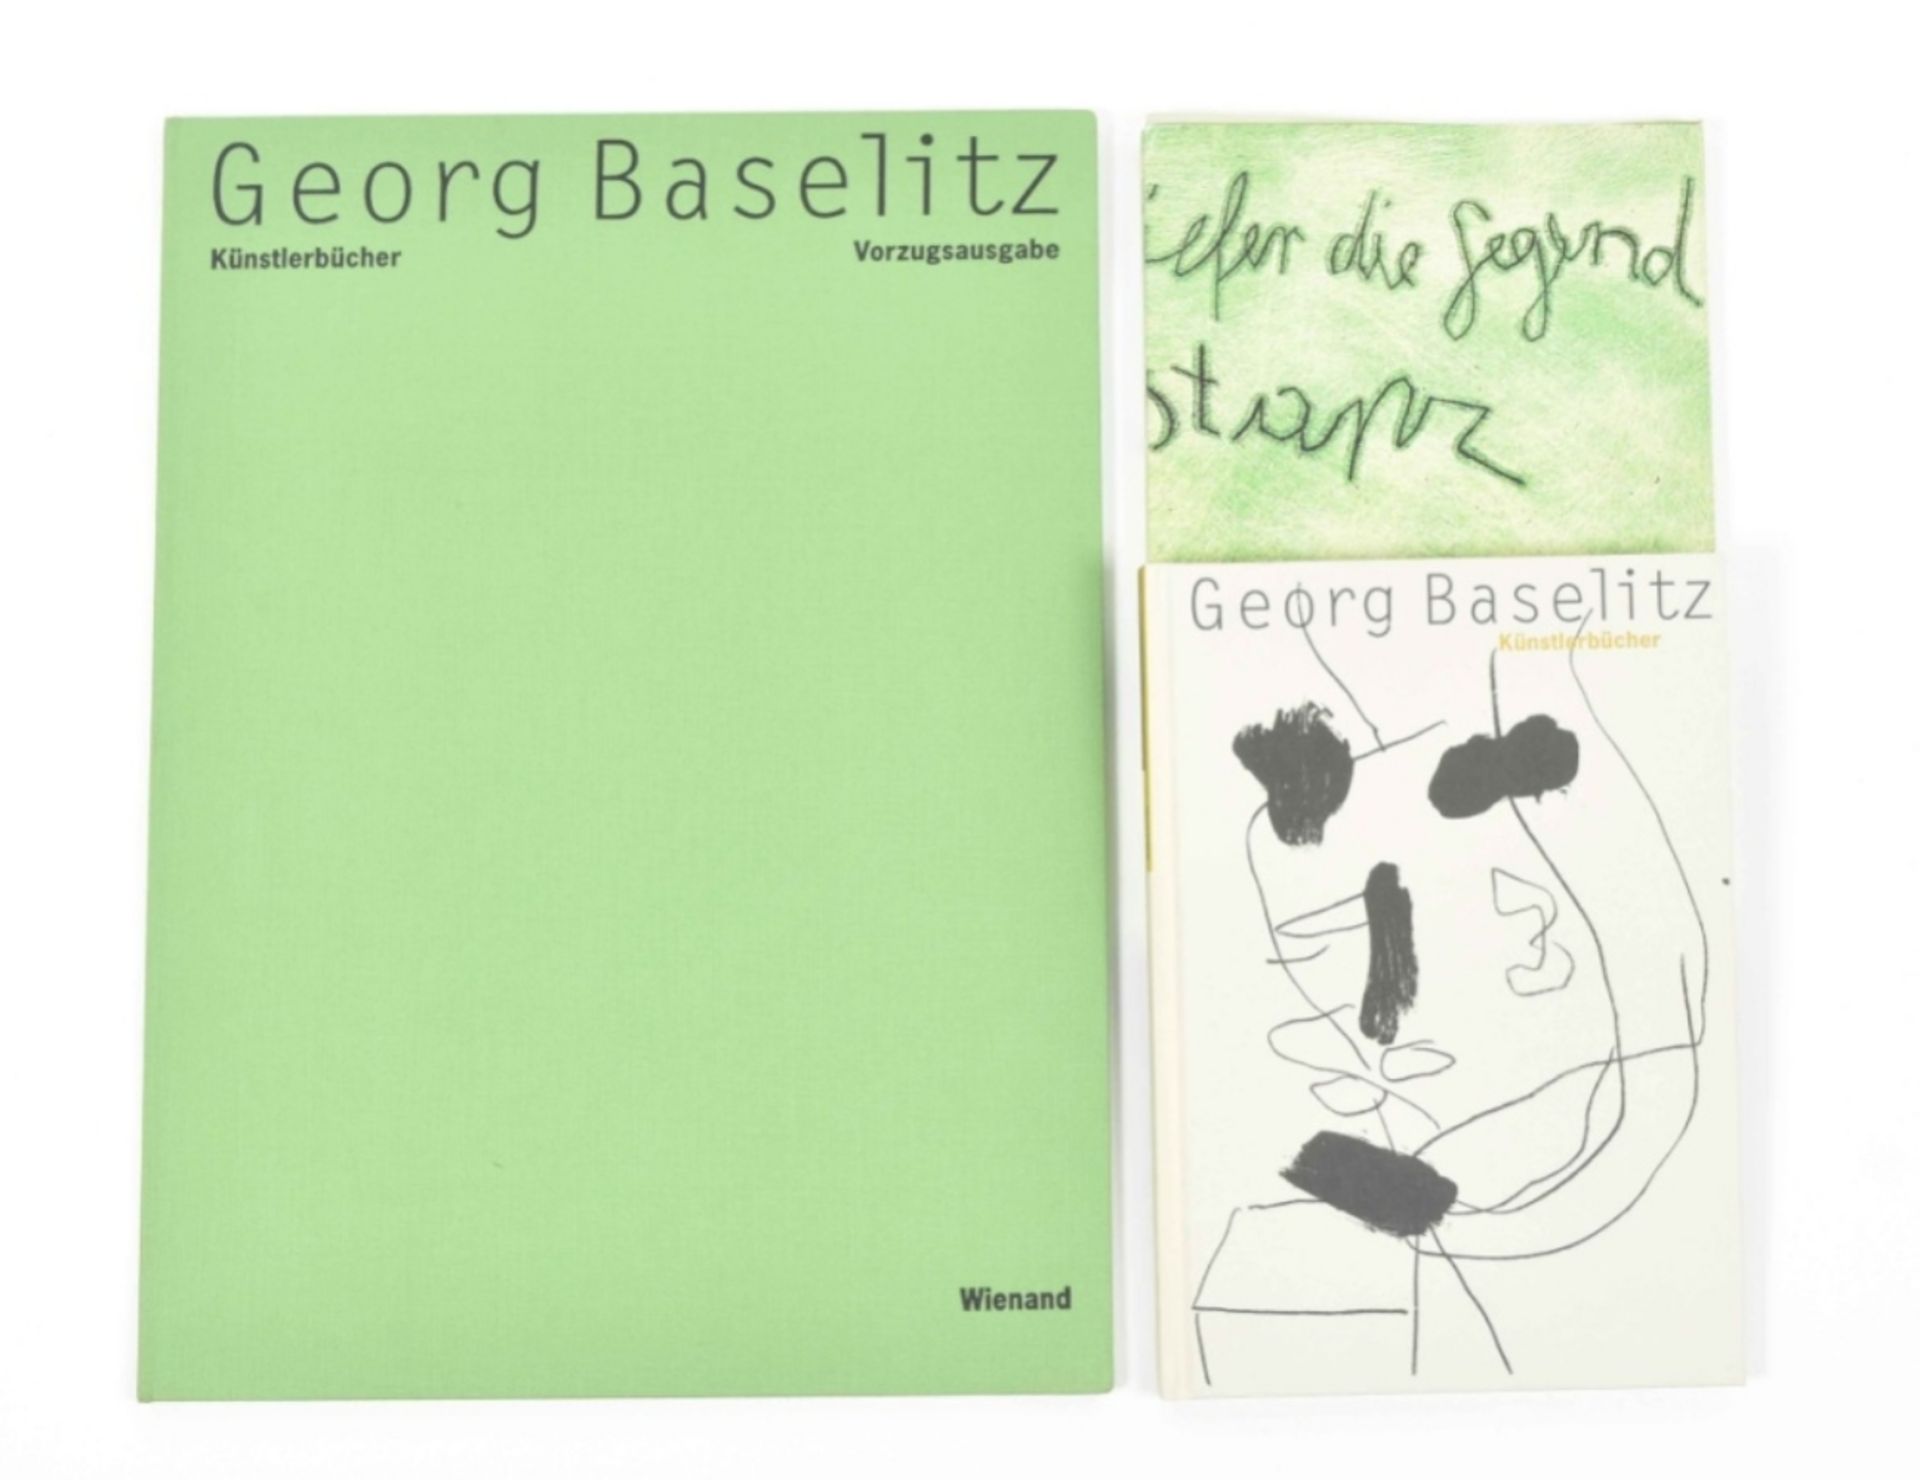 [s and up] Georg Baselitz, book and signed aquatint